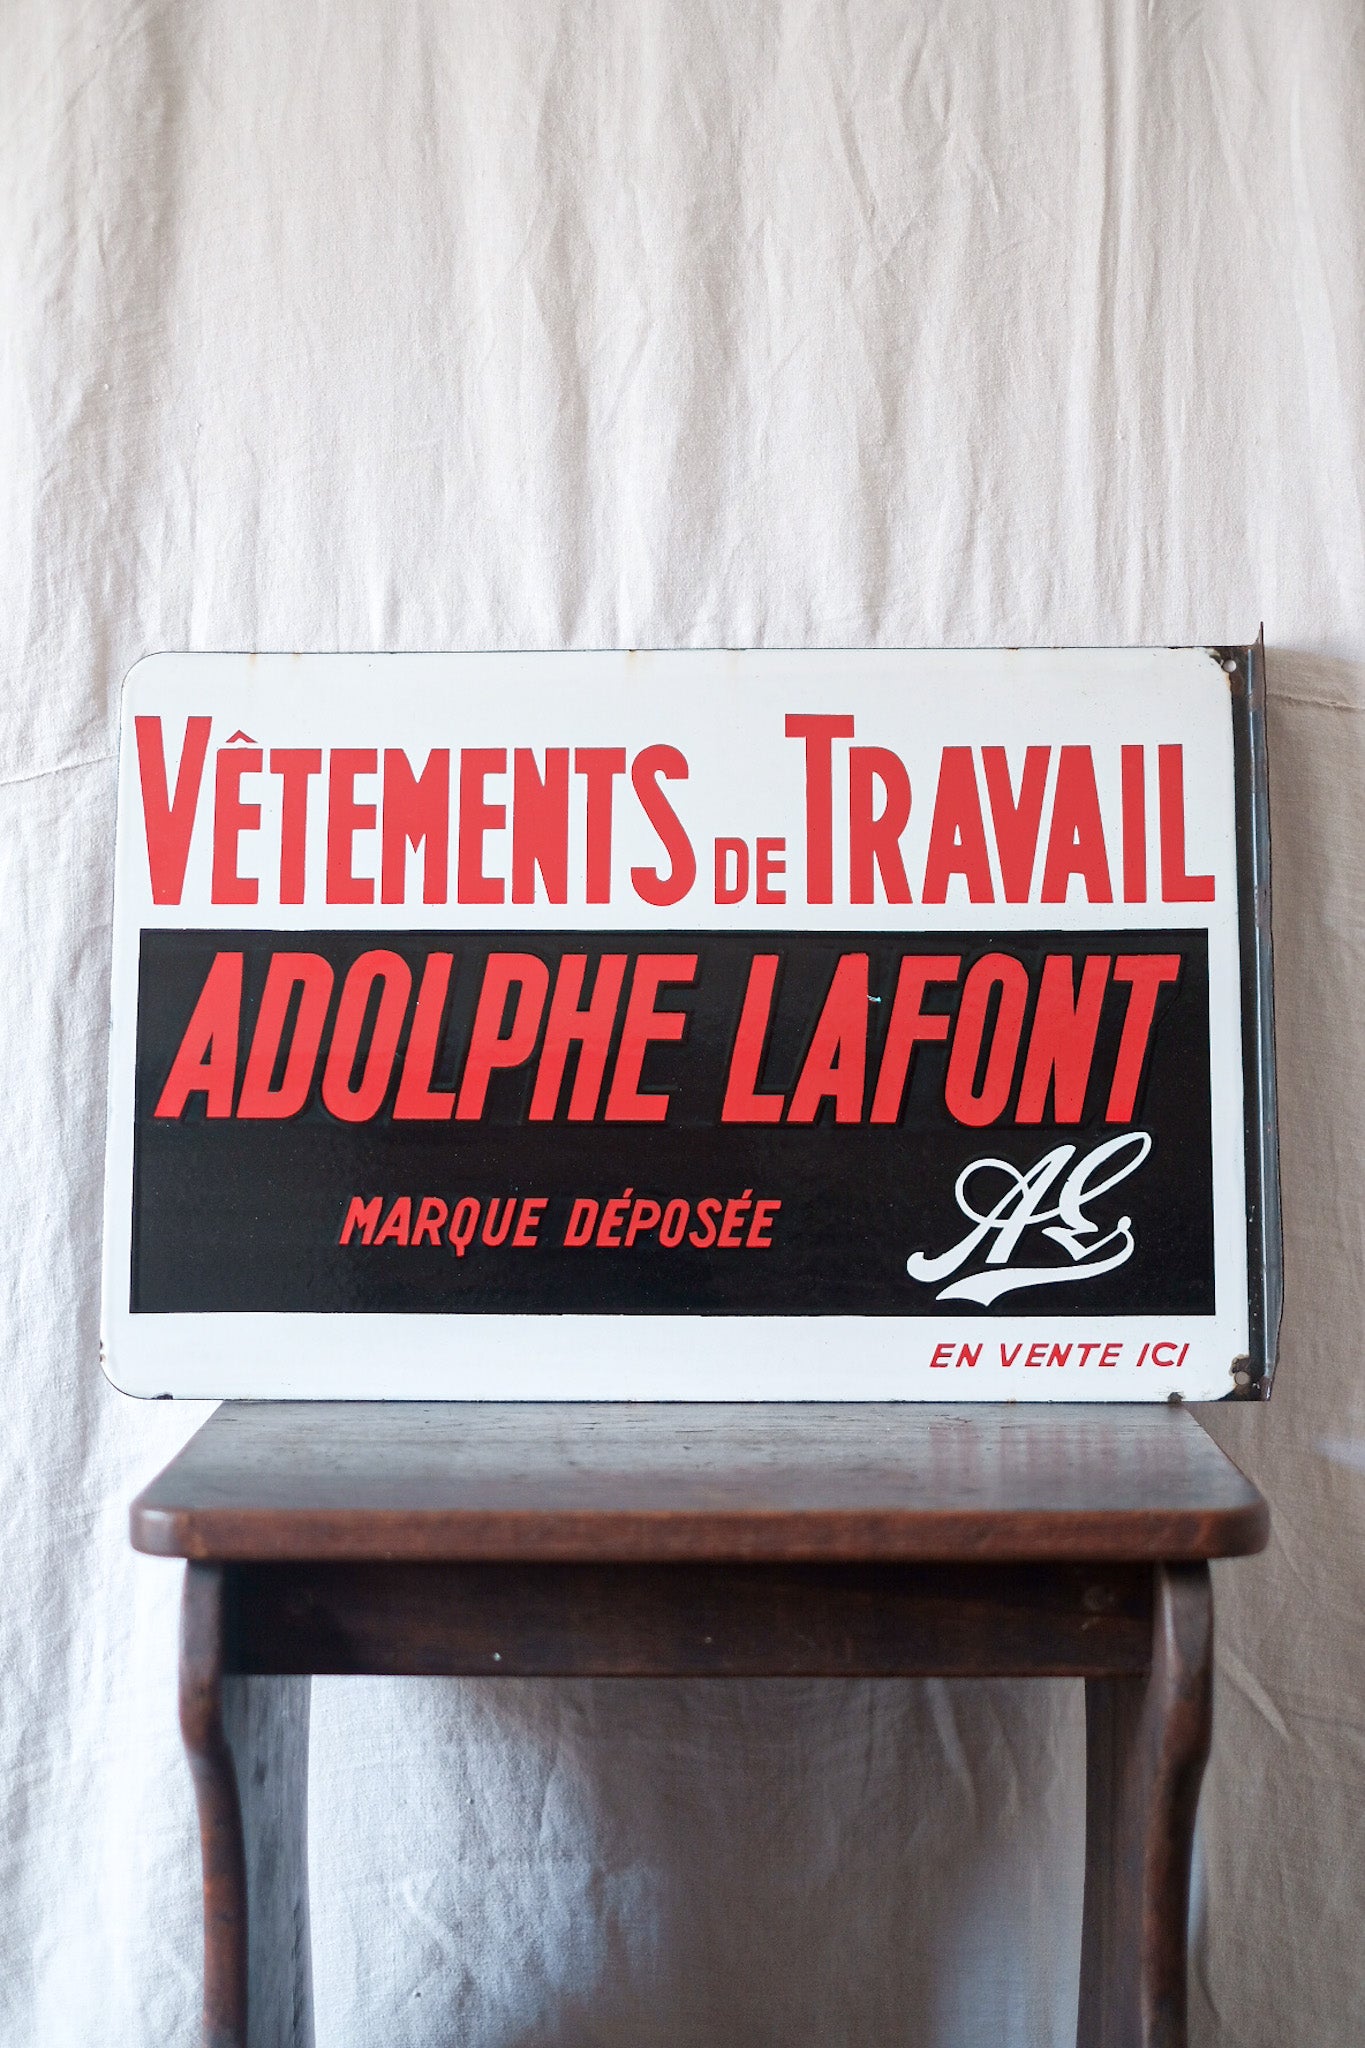 [~ 50's] French Vintage Enamel Plate "Adolphe Lafont"